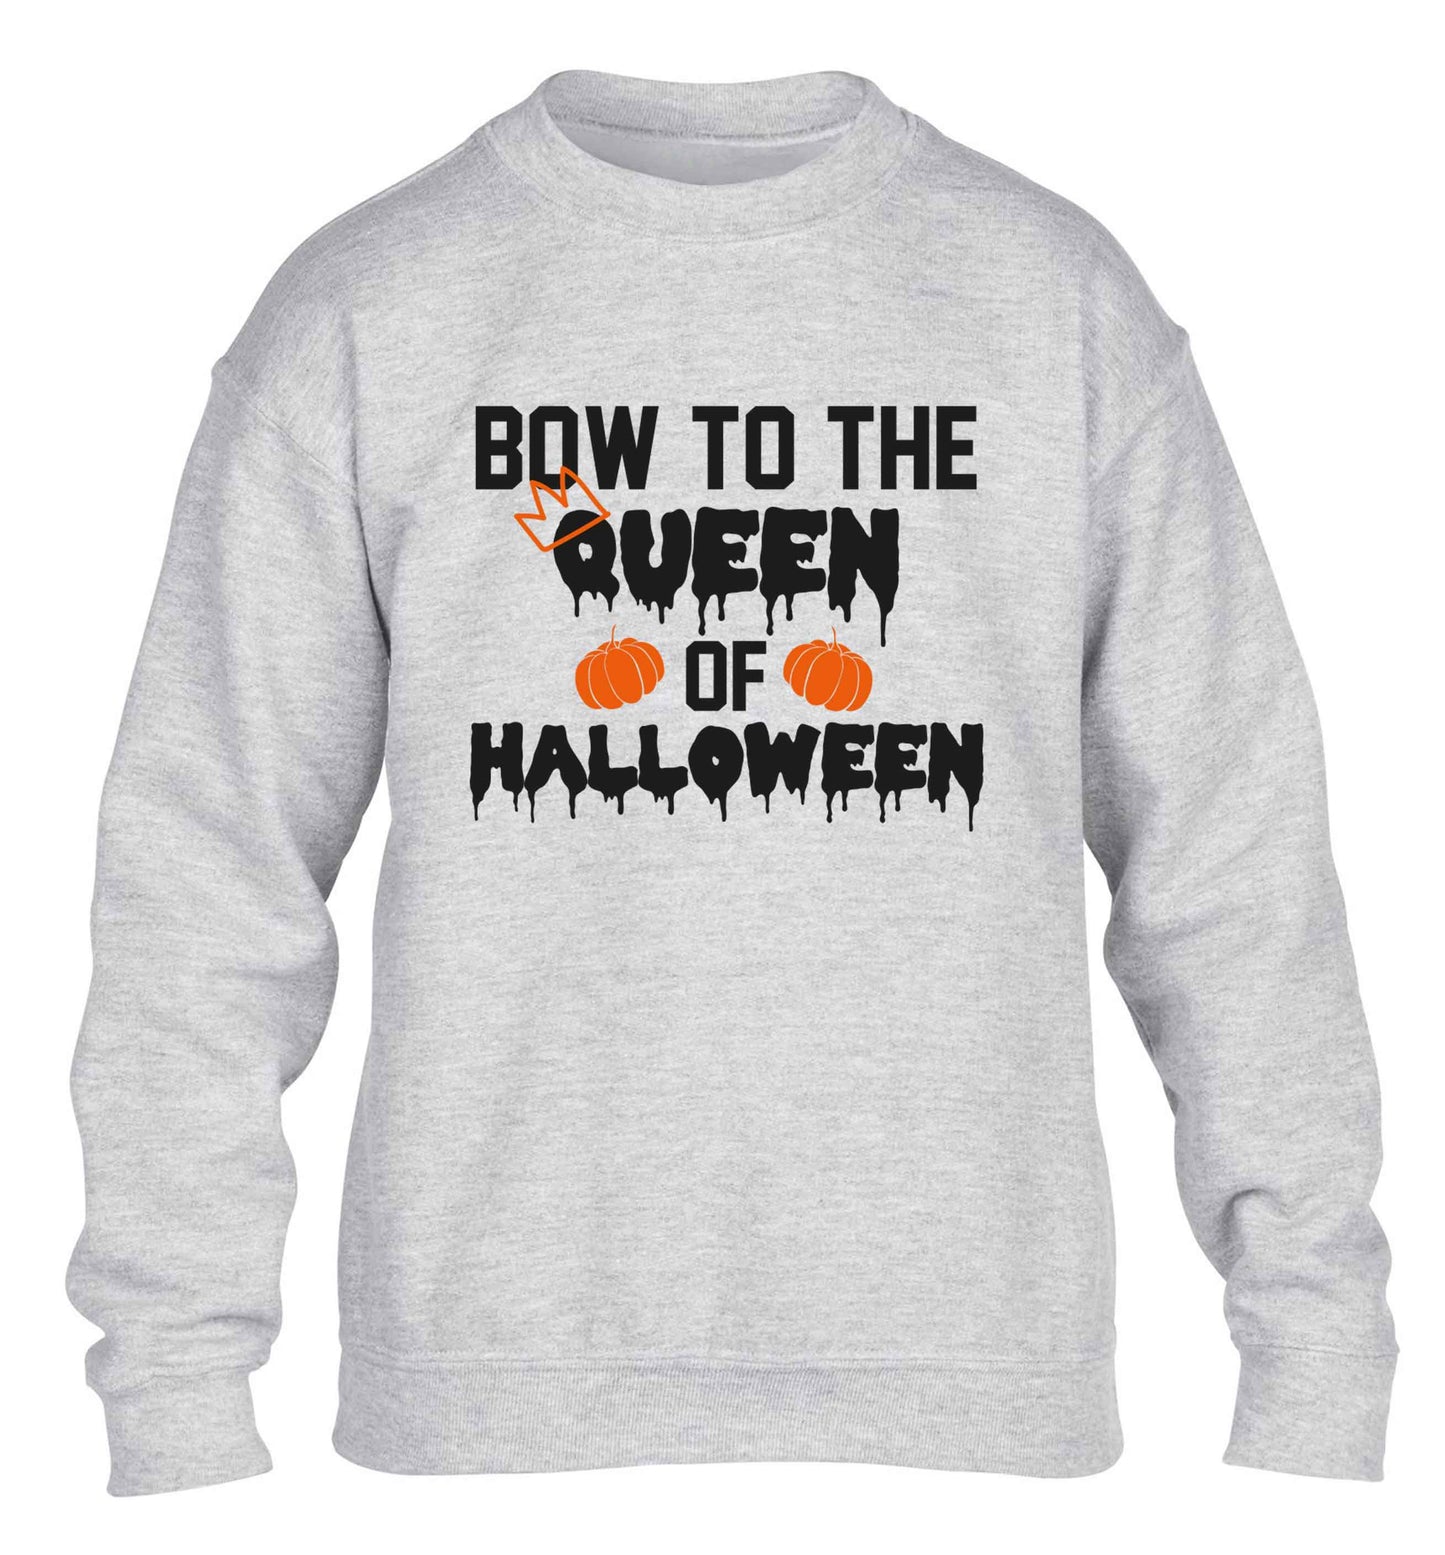 Bow to the Queen of halloween children's grey sweater 12-13 Years